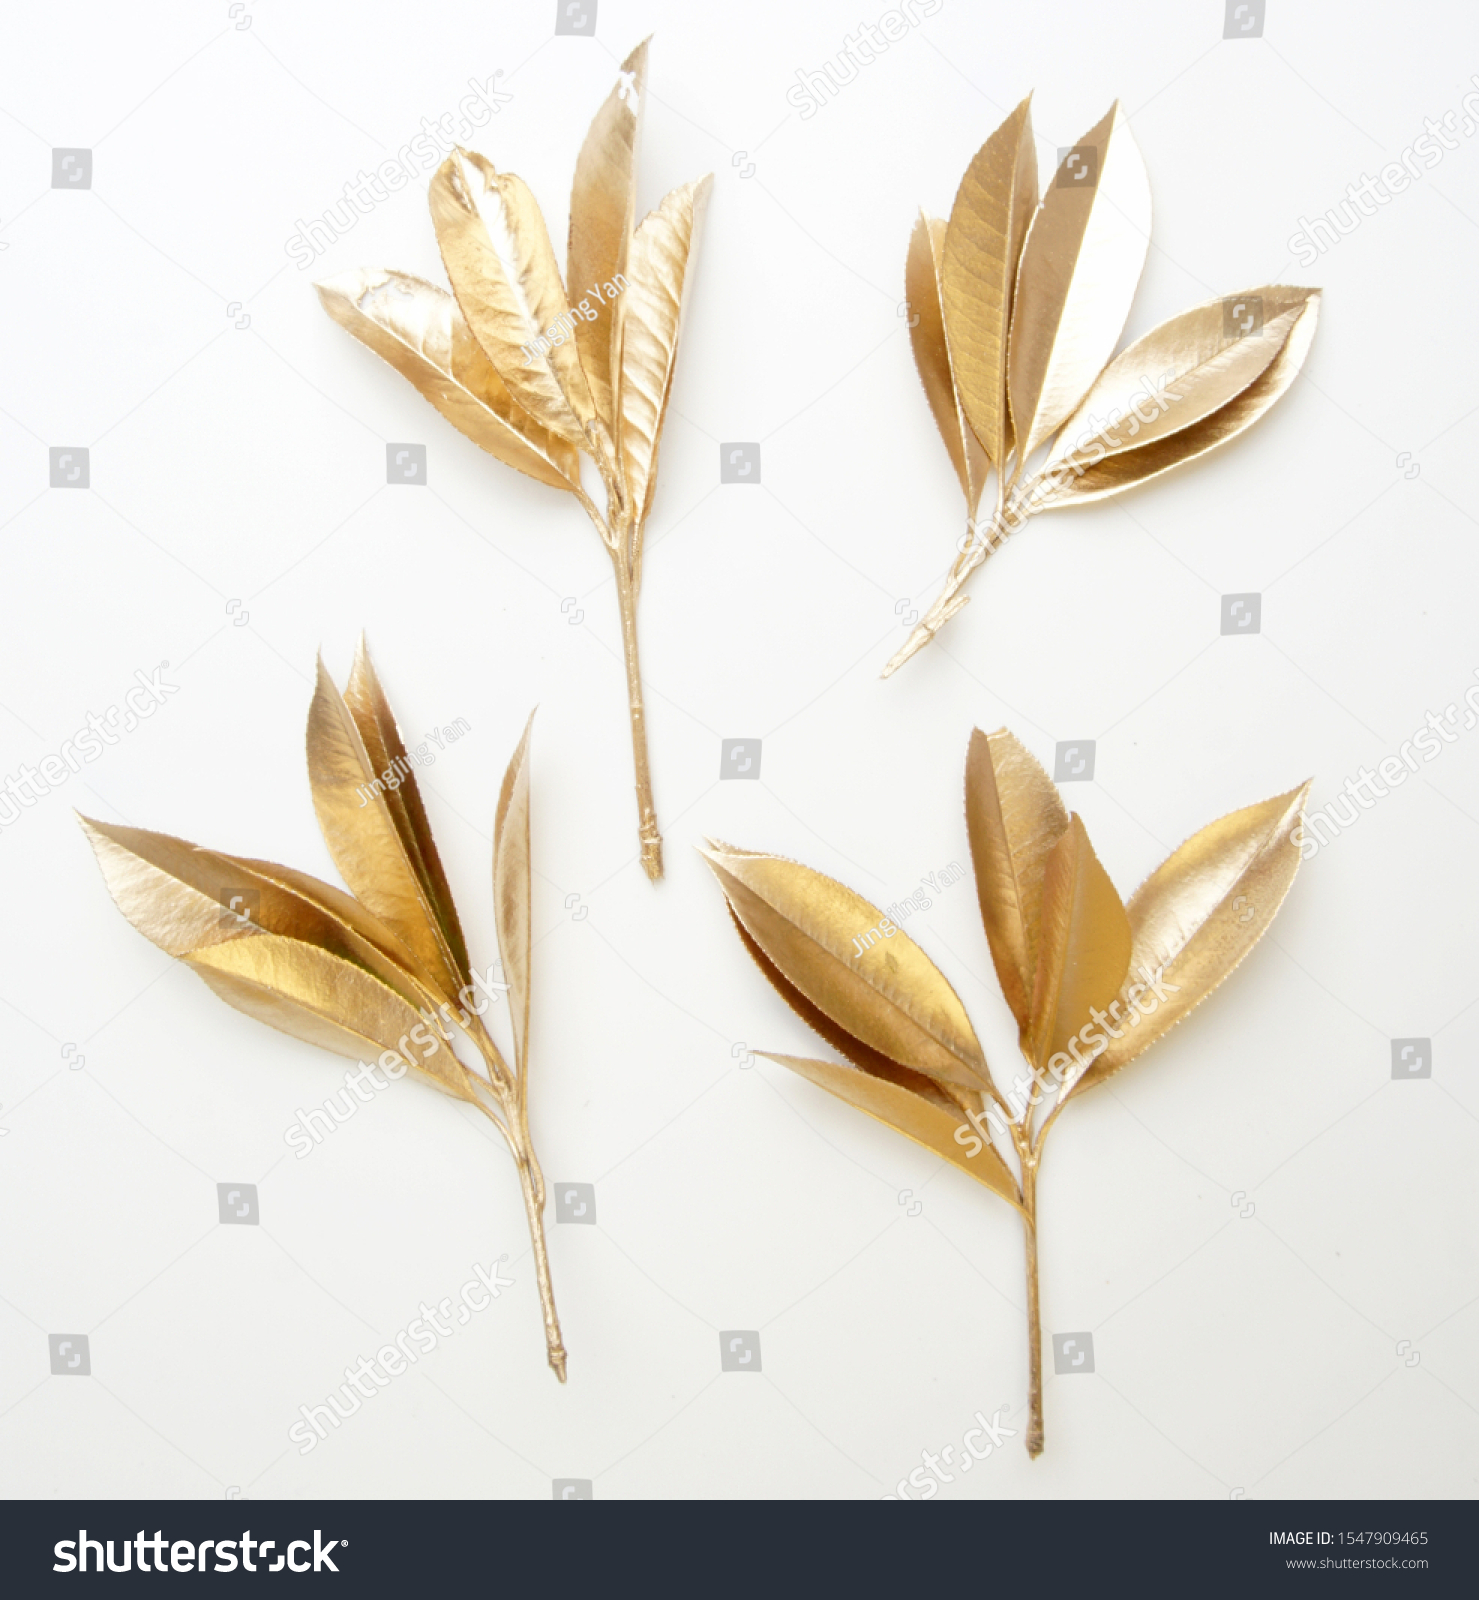  golden leaf design elements. Decoration elements for invitation, wedding cards, valentines day, greeting cards. Christmas decor Isolated on white background.                                 #1547909465